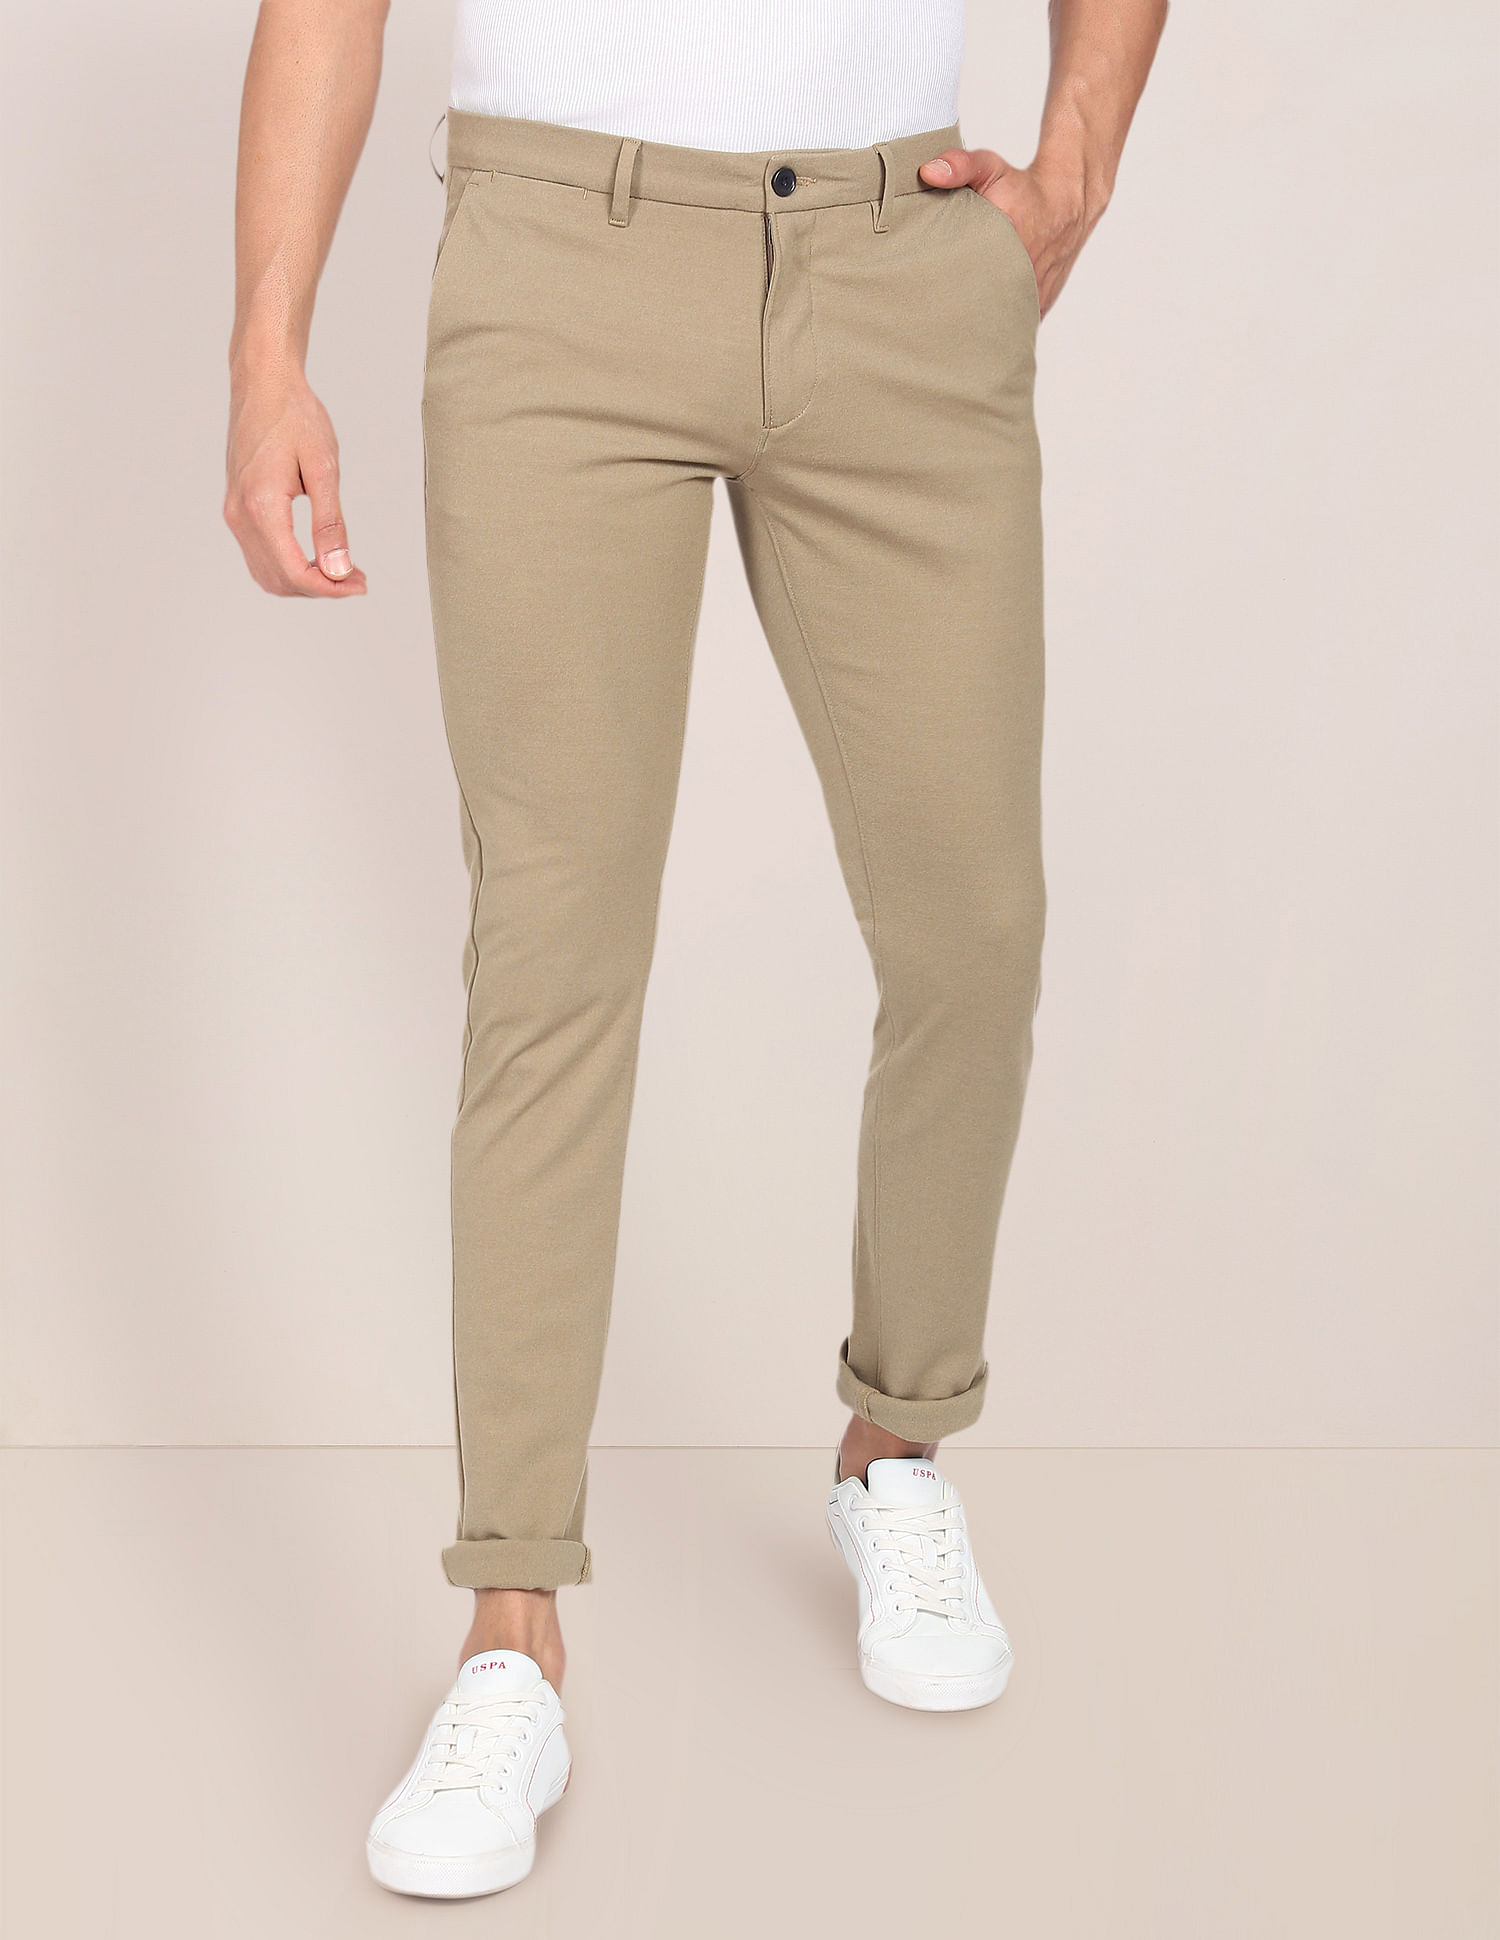 Us Polo Assn Semi Formal Trousers  Buy Us Polo Assn Semi Formal Trousers  online in India